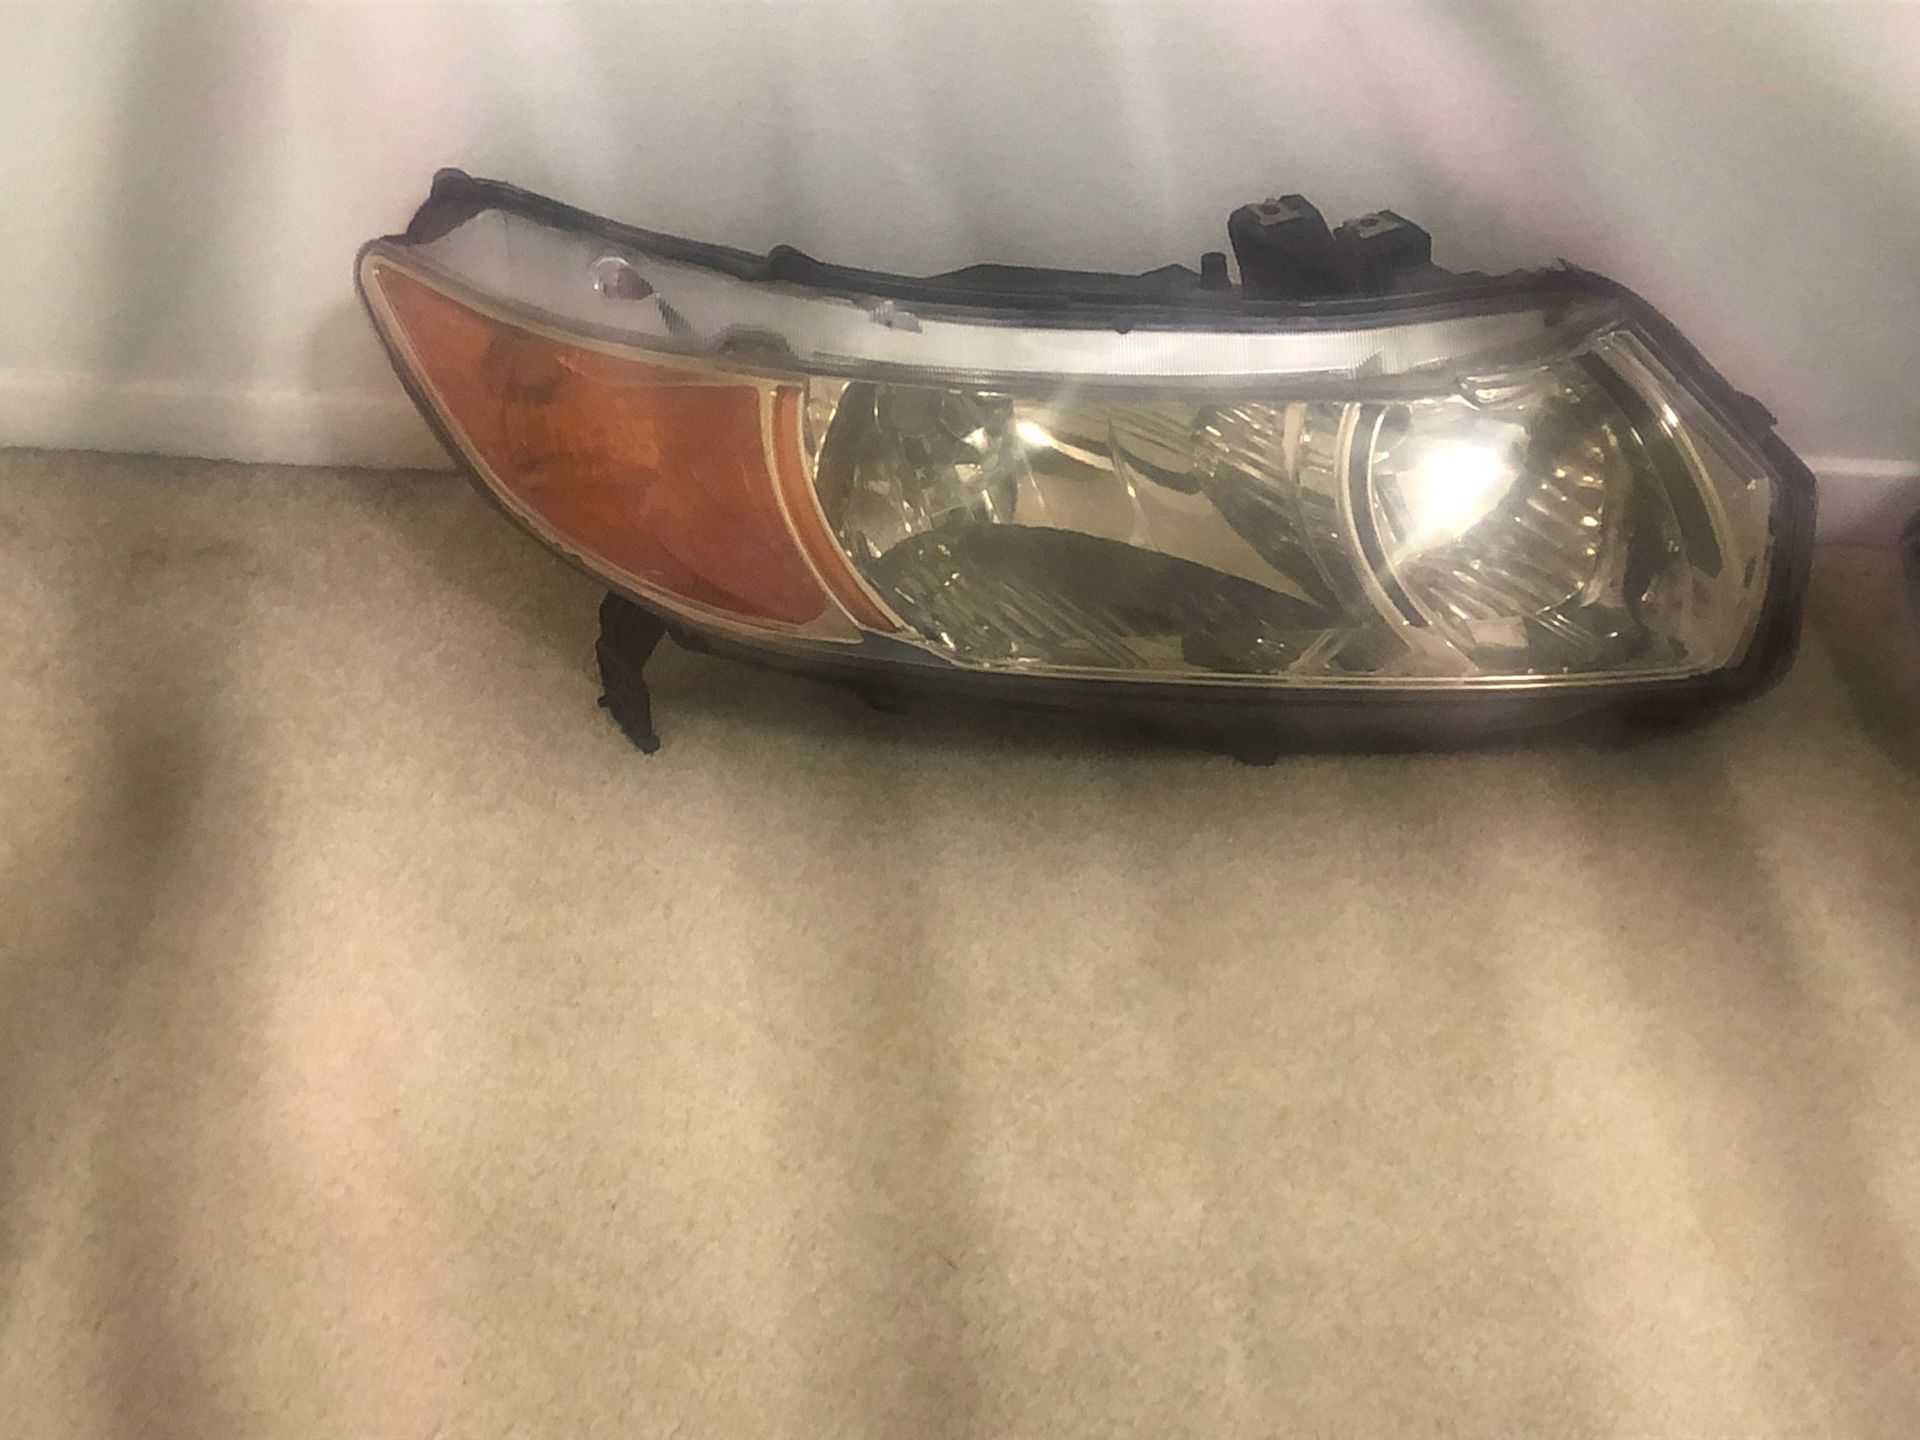 Honda Civic headlights for coupe (2-door) ONLY RIGHT SIDE (passenger)